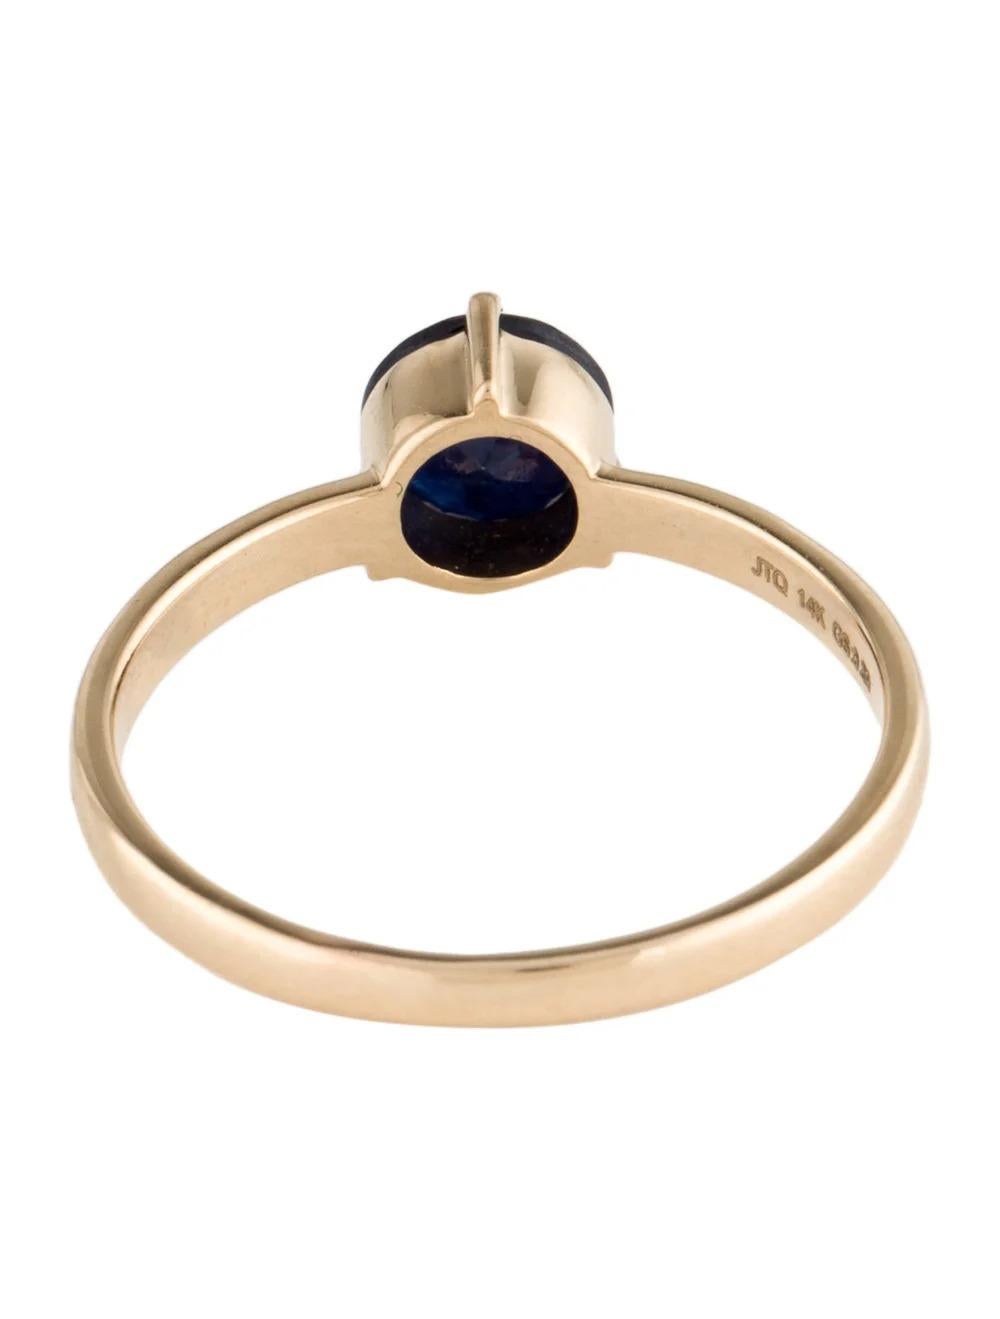 14K Sapphire Cocktail Ring, Size 6.75, Blue Gemstone Jewelry, Designer In New Condition For Sale In Holtsville, NY